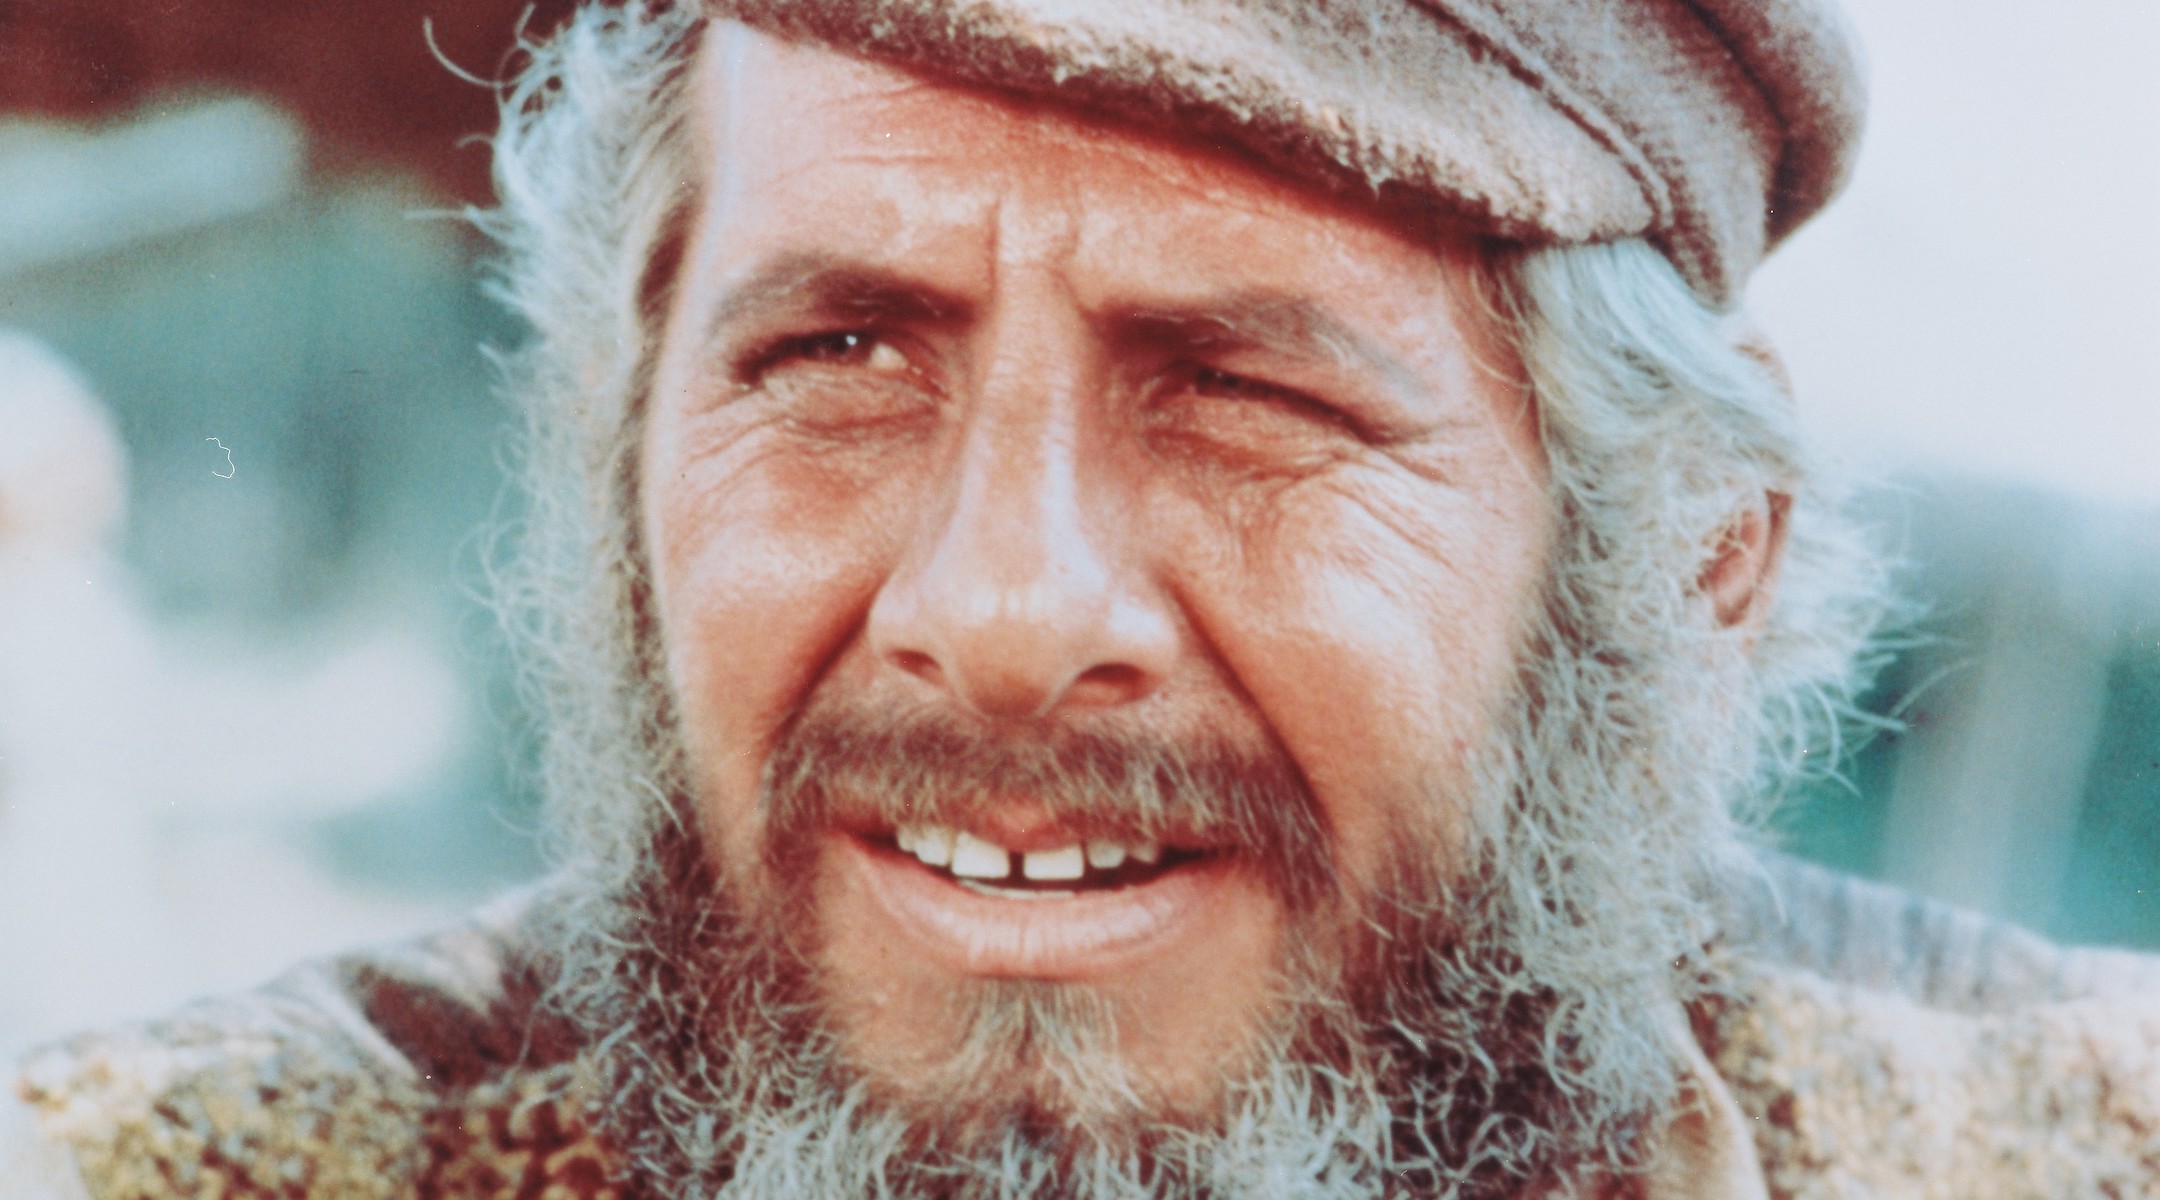 Topol appears as Tevye in the 1971 film “Fiddler on the Roof.”